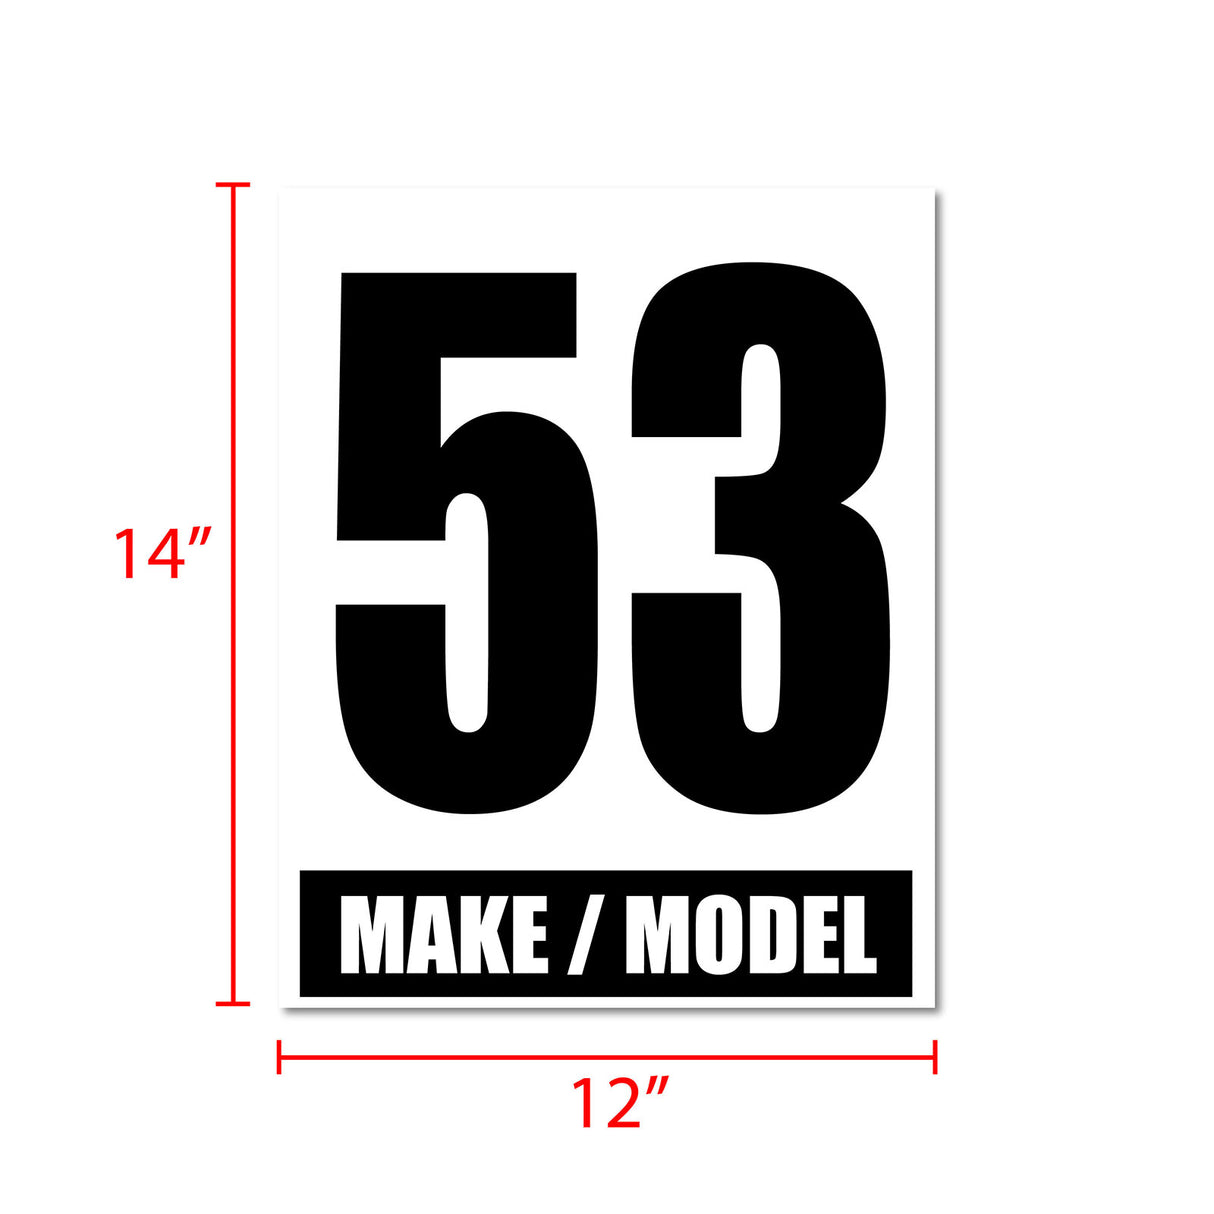 Autocross Custom Racing Numbers Sticker Vinyl Decal Make Model 2 pieces Black Words White Background 12 inch x 15 inch